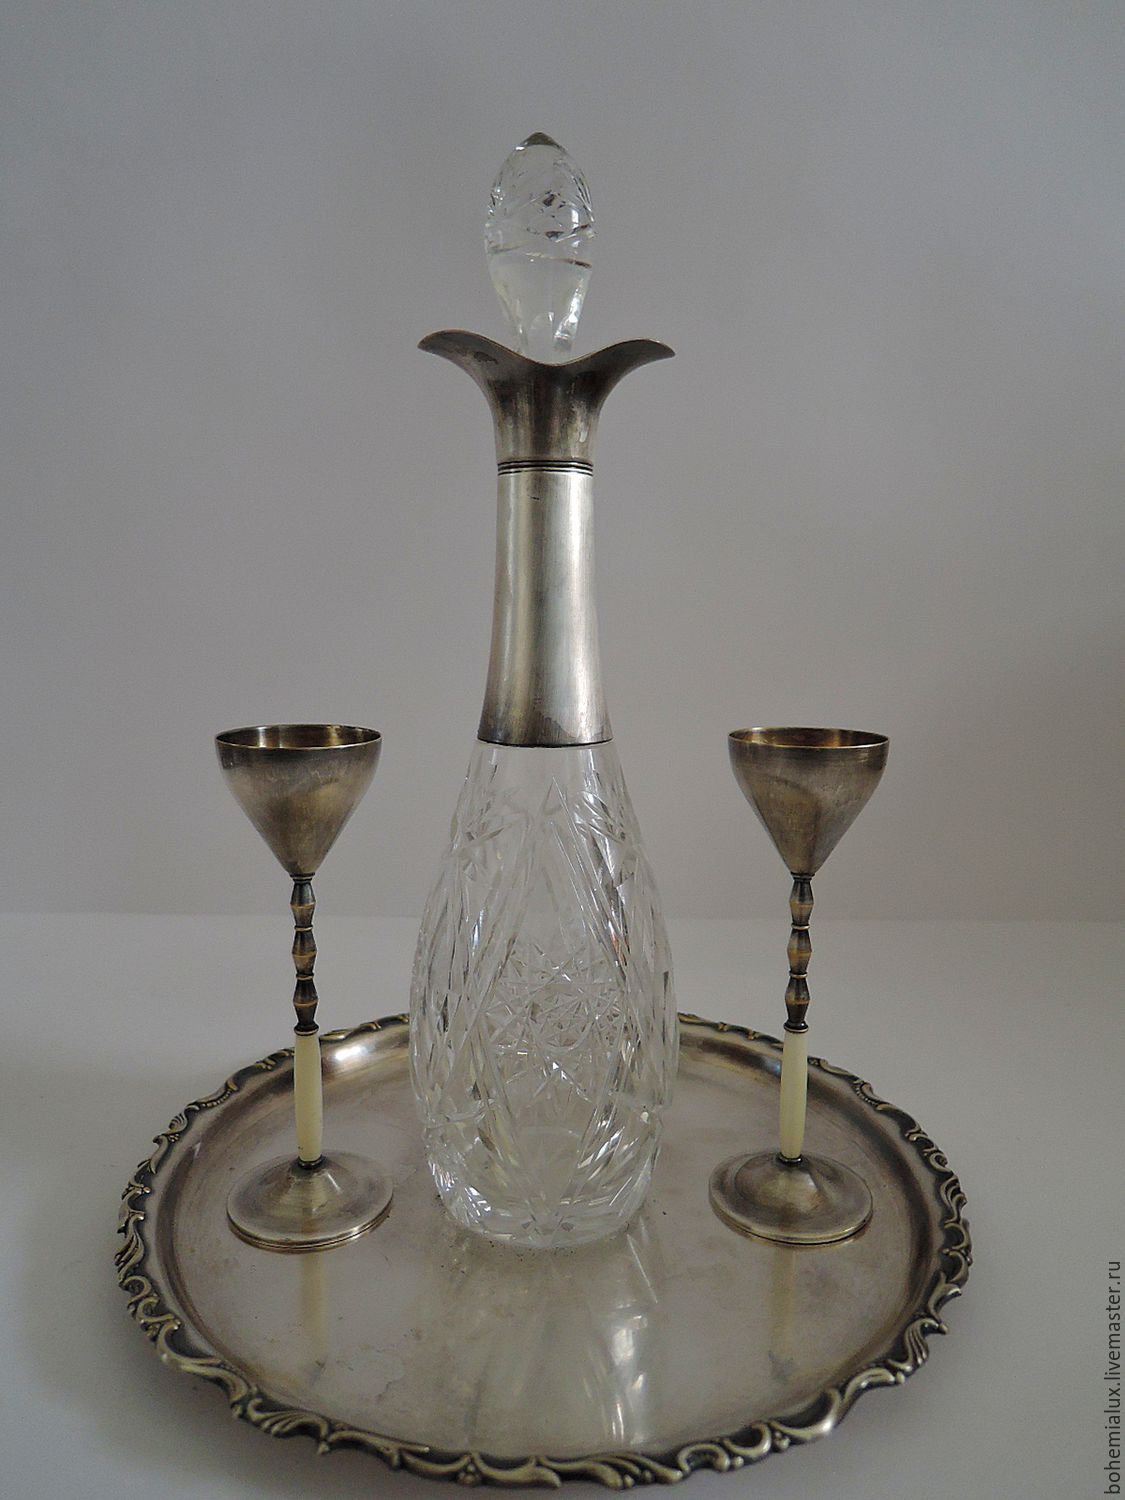 Set Decanter Glasses Tray Crystal Silver Wmf 1910 Shop Online On 4675